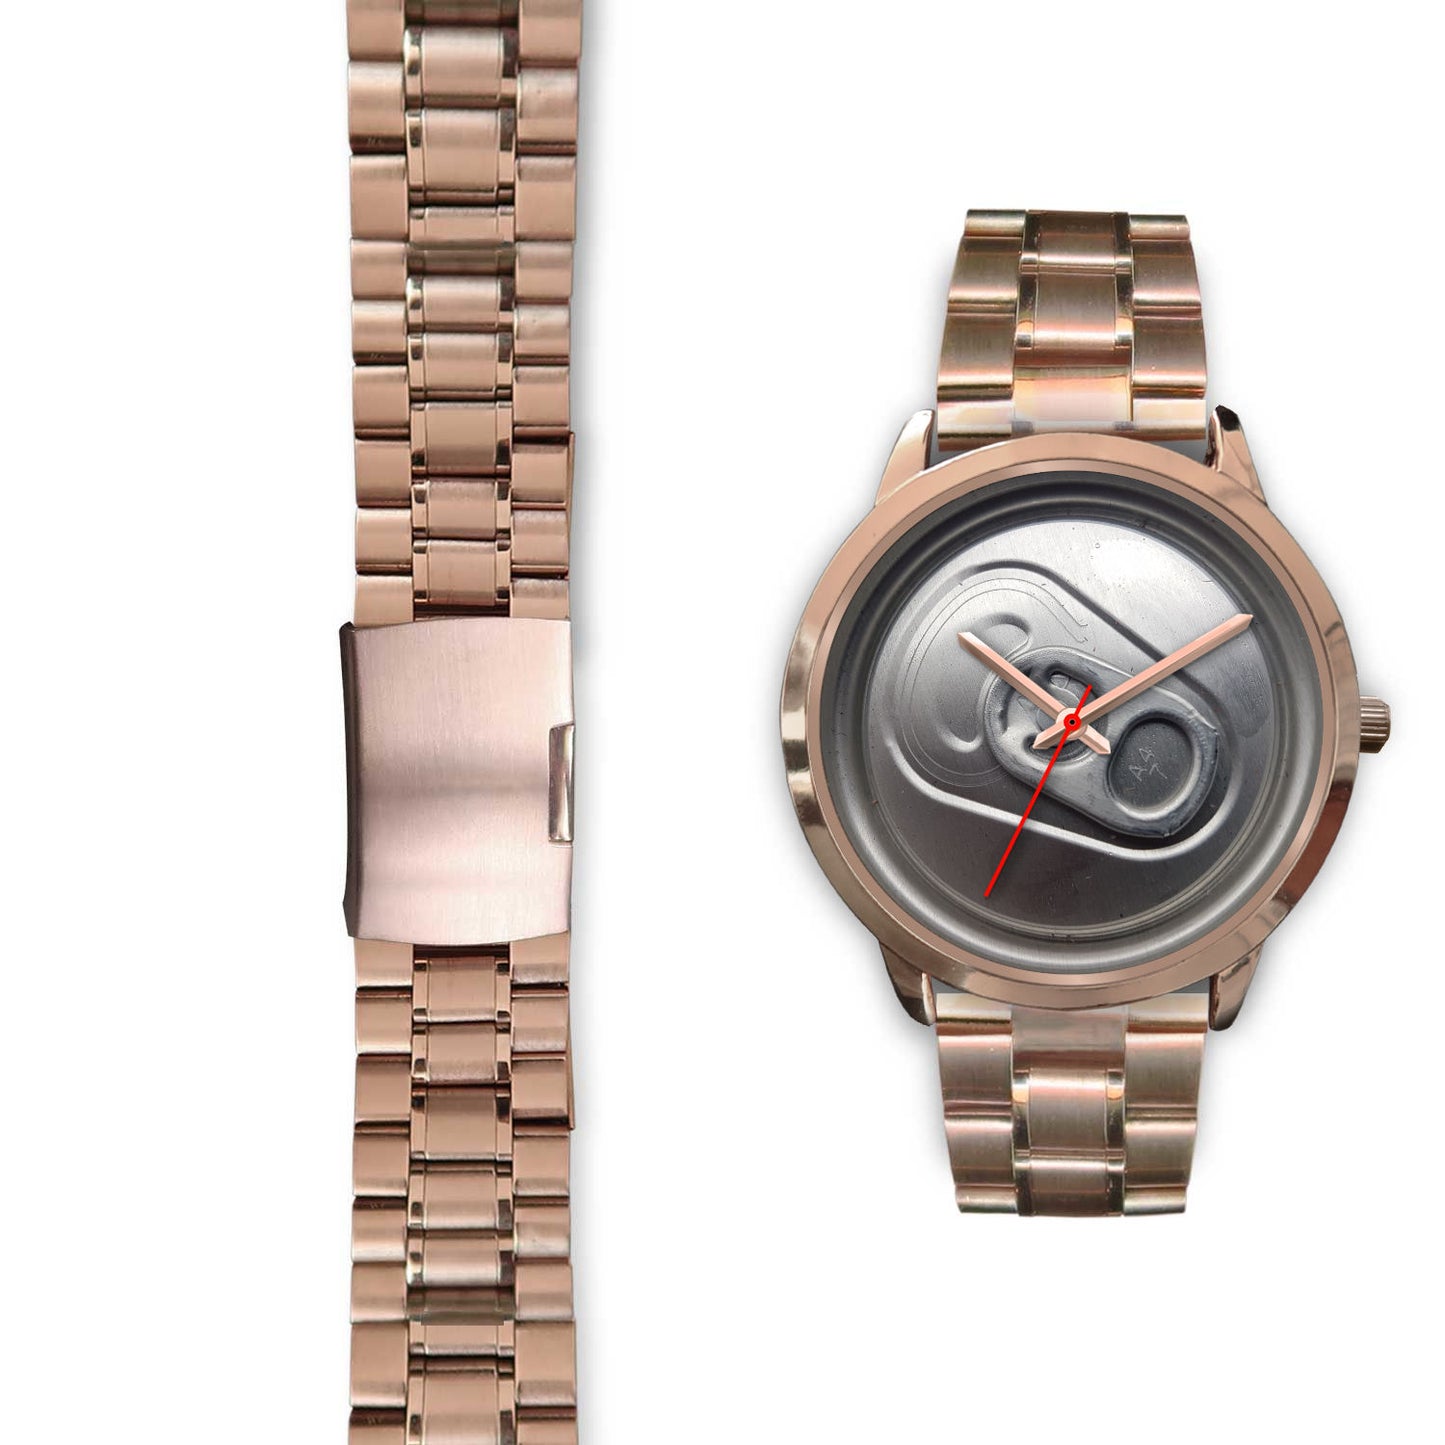 Beer time watch rose gold